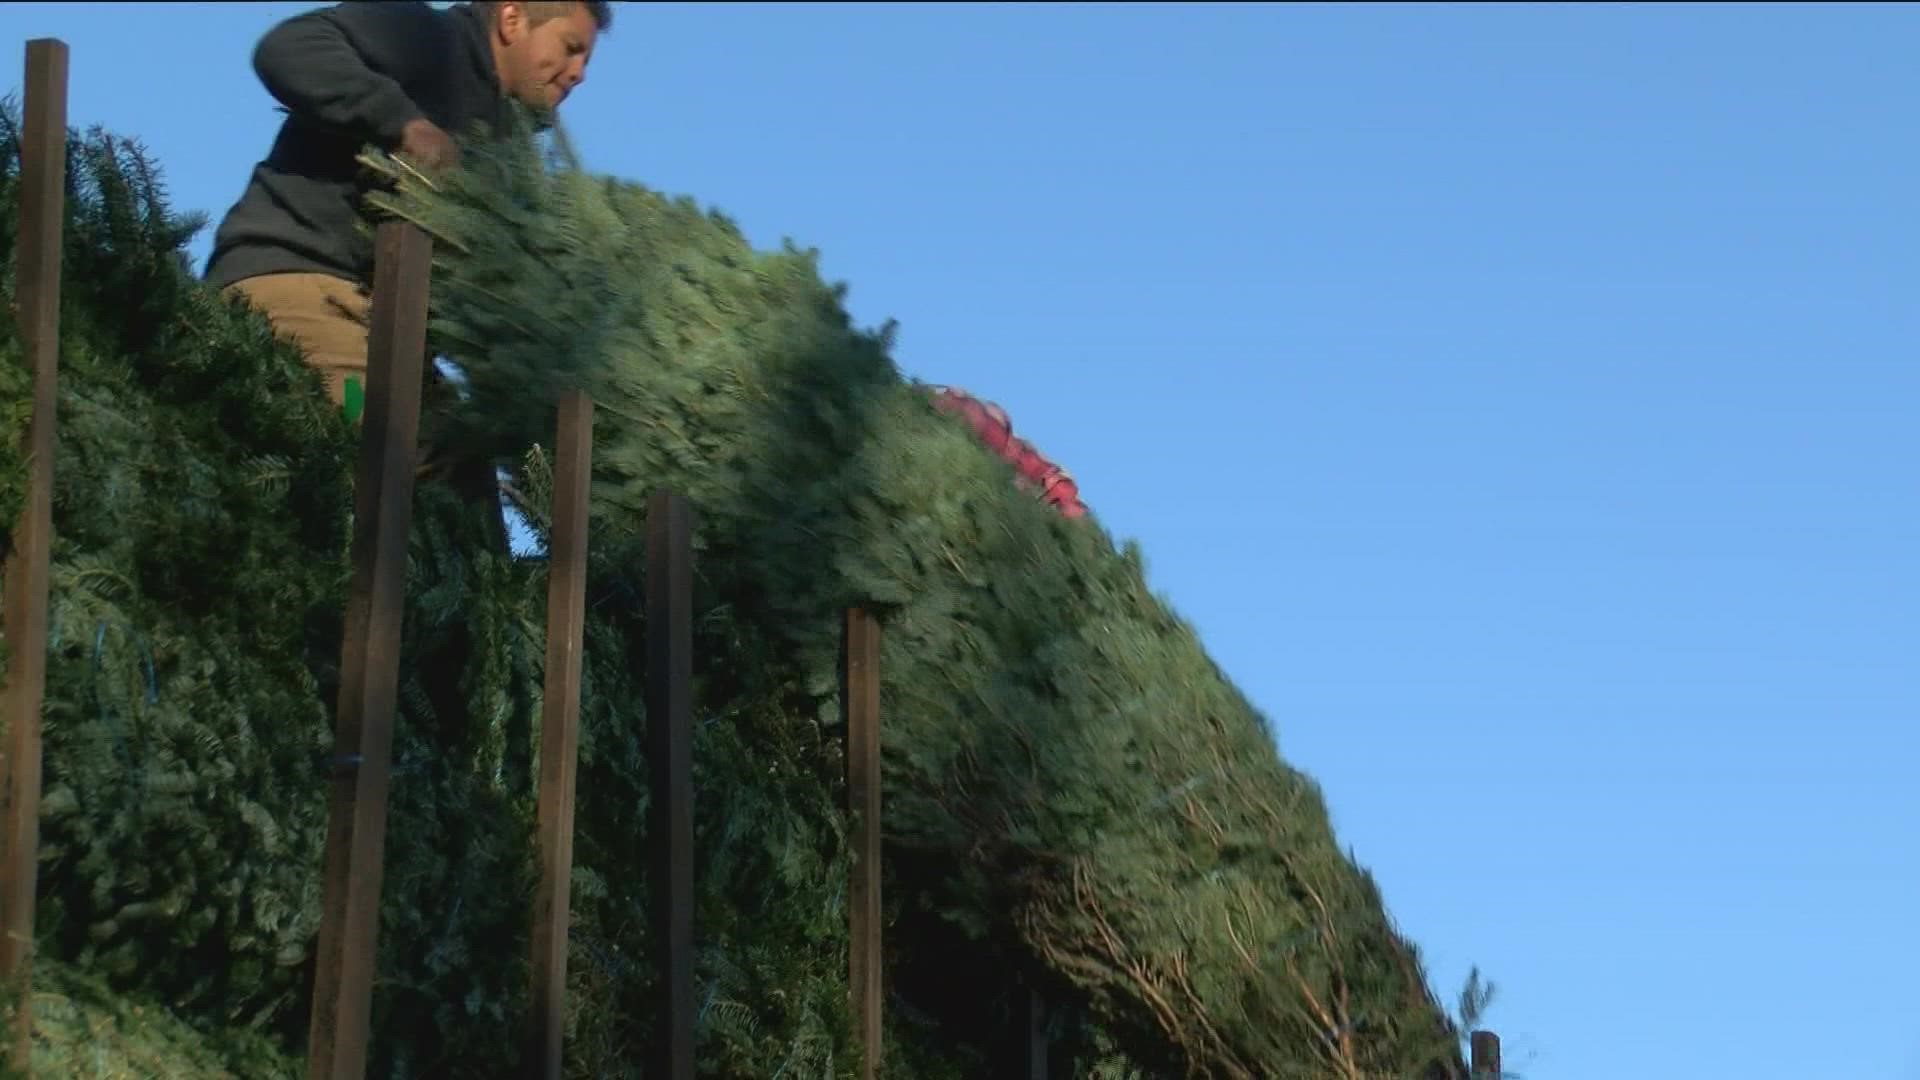 Farmers at Whitehouse Christmas Tree Farm say other factors like a tight labor market and high fuel costs are also having an effect on the price of trees this year.